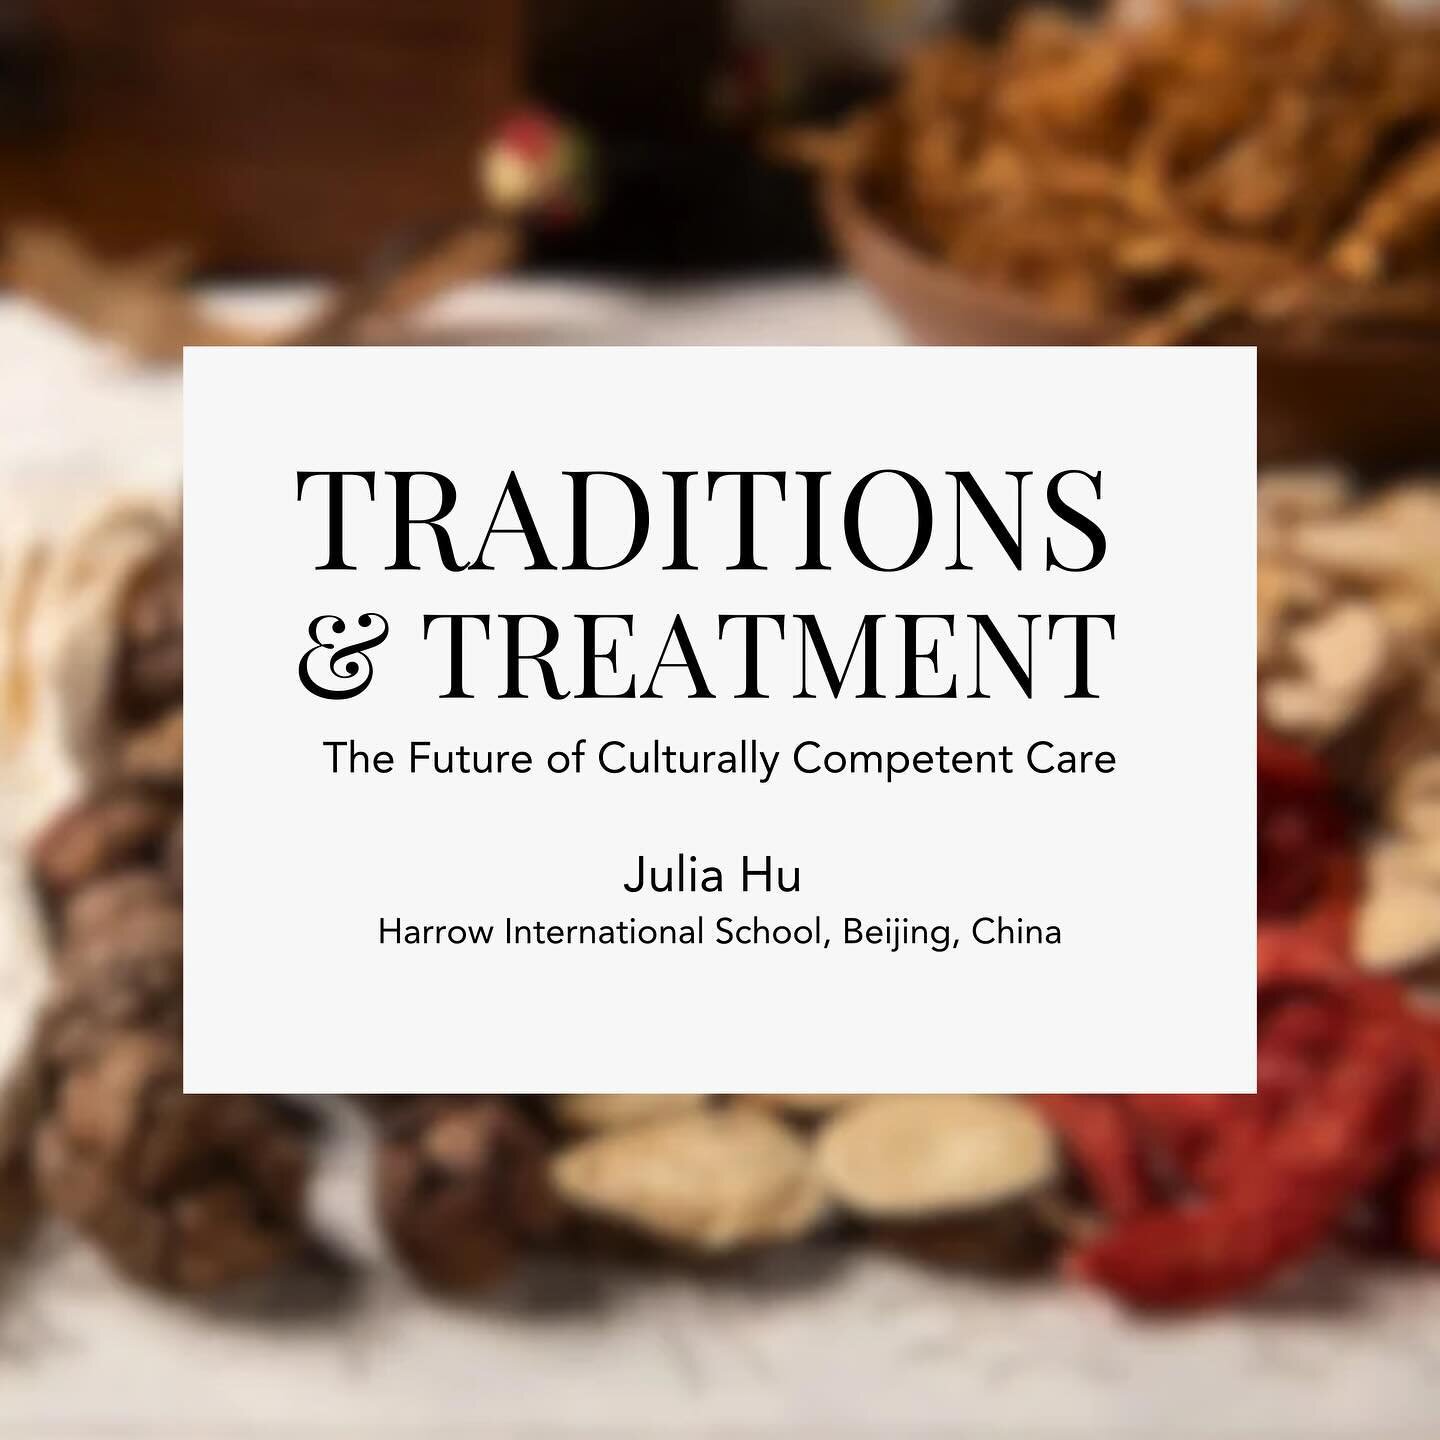 How do we define medical care? How do hospitals in China differ from the Western system? Julia explores these thought-provoking ideas in her article, Traditions and Treatments. Read more in our February issue at culturator.org/issues 
.
.
.
#Culturat